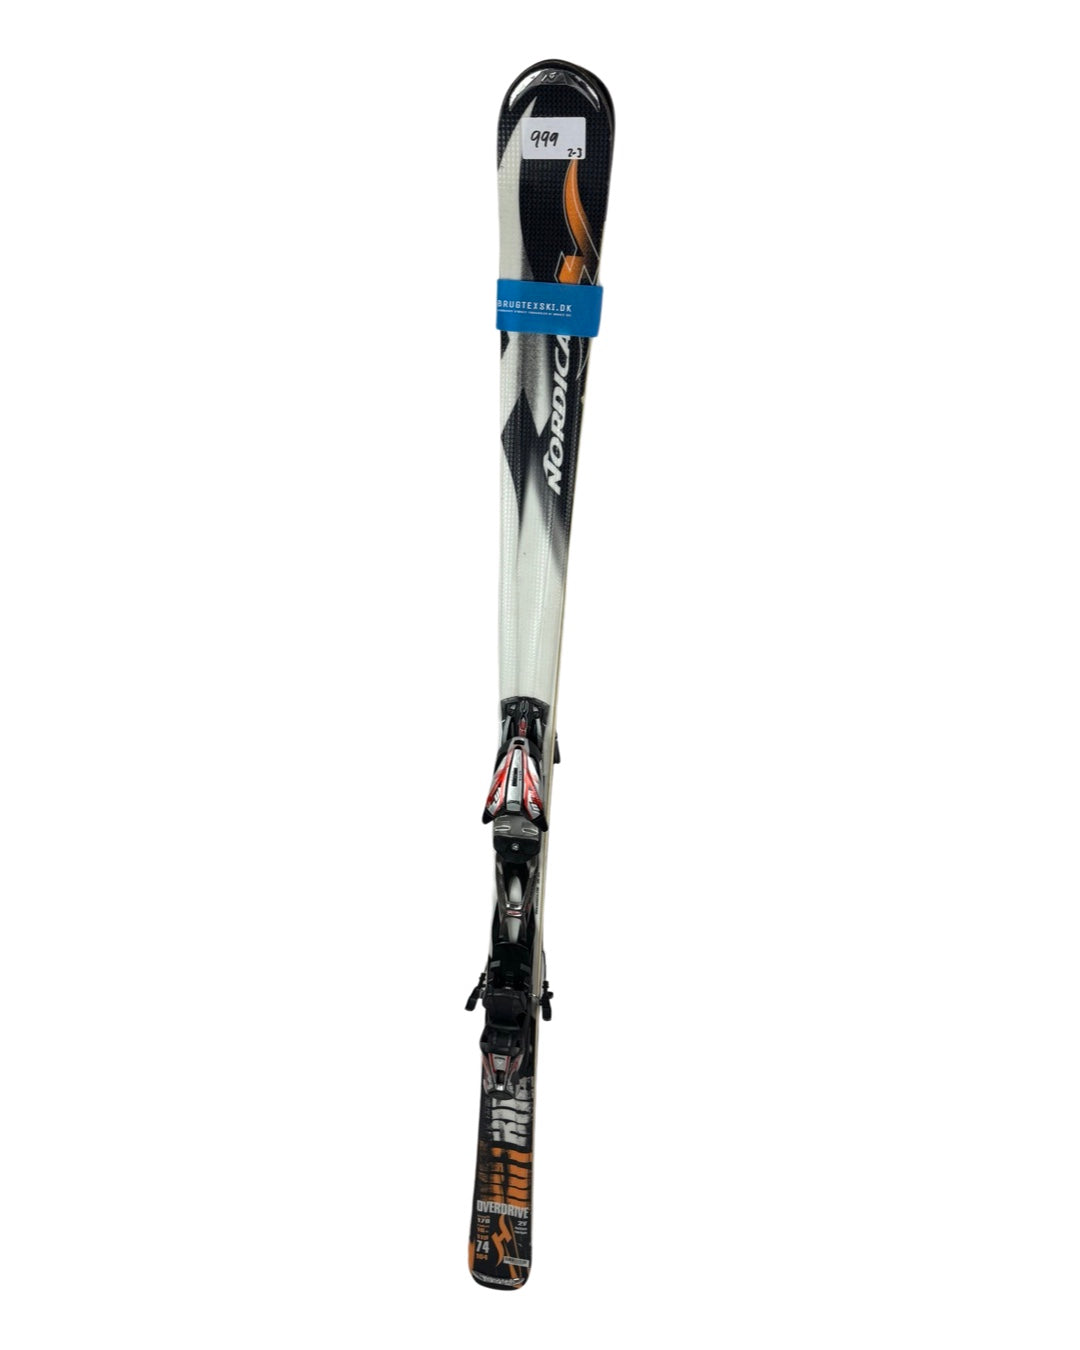 Adult skis - mixed 999 2